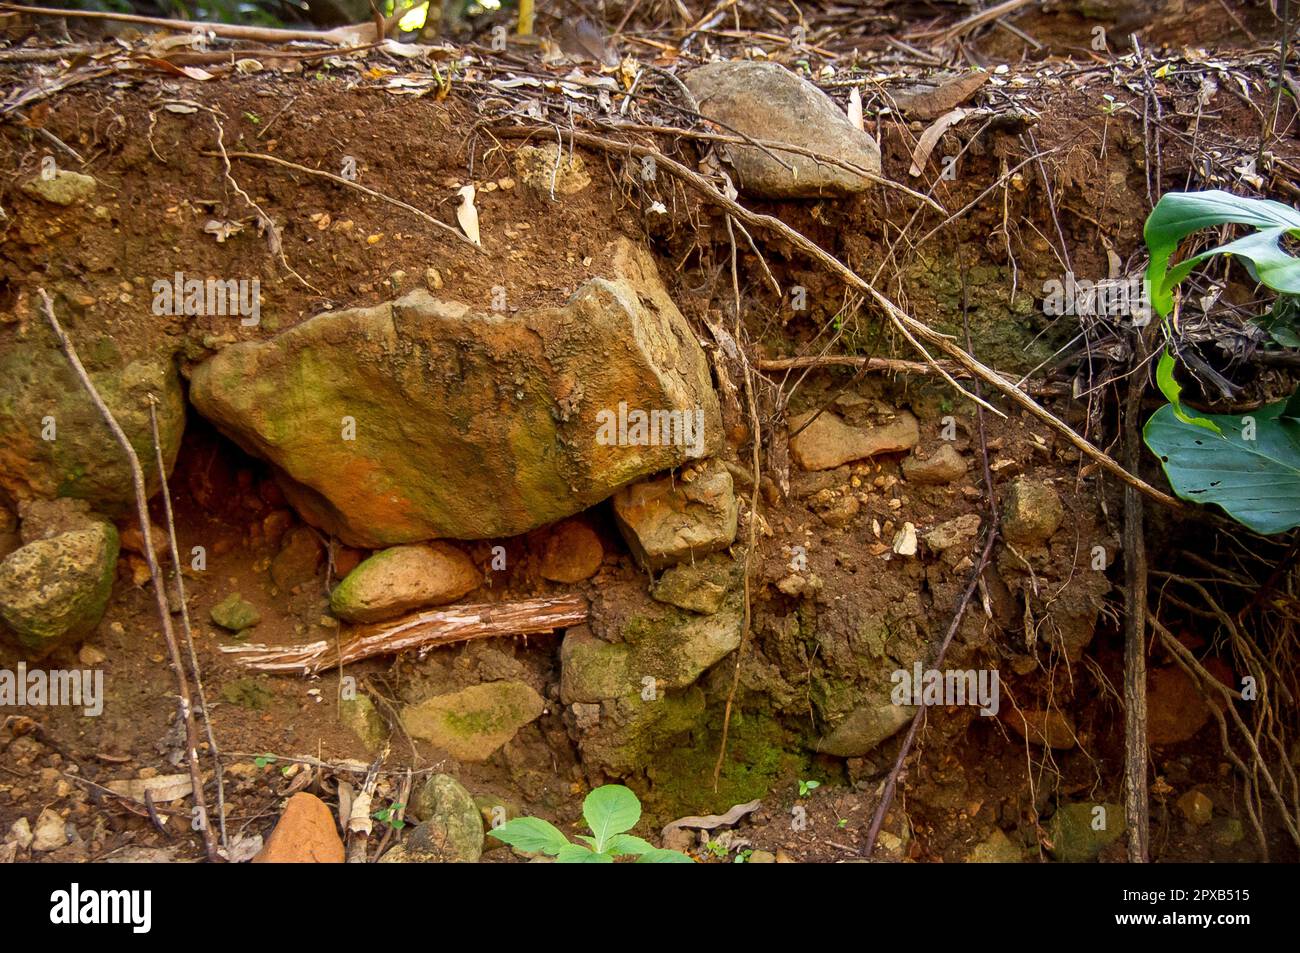 Volcanic basalt boulders and exposed tree roots after a landslip of unconsolidated ground caused by rain,  in rainforest.  Queensland, Australia Stock Photo